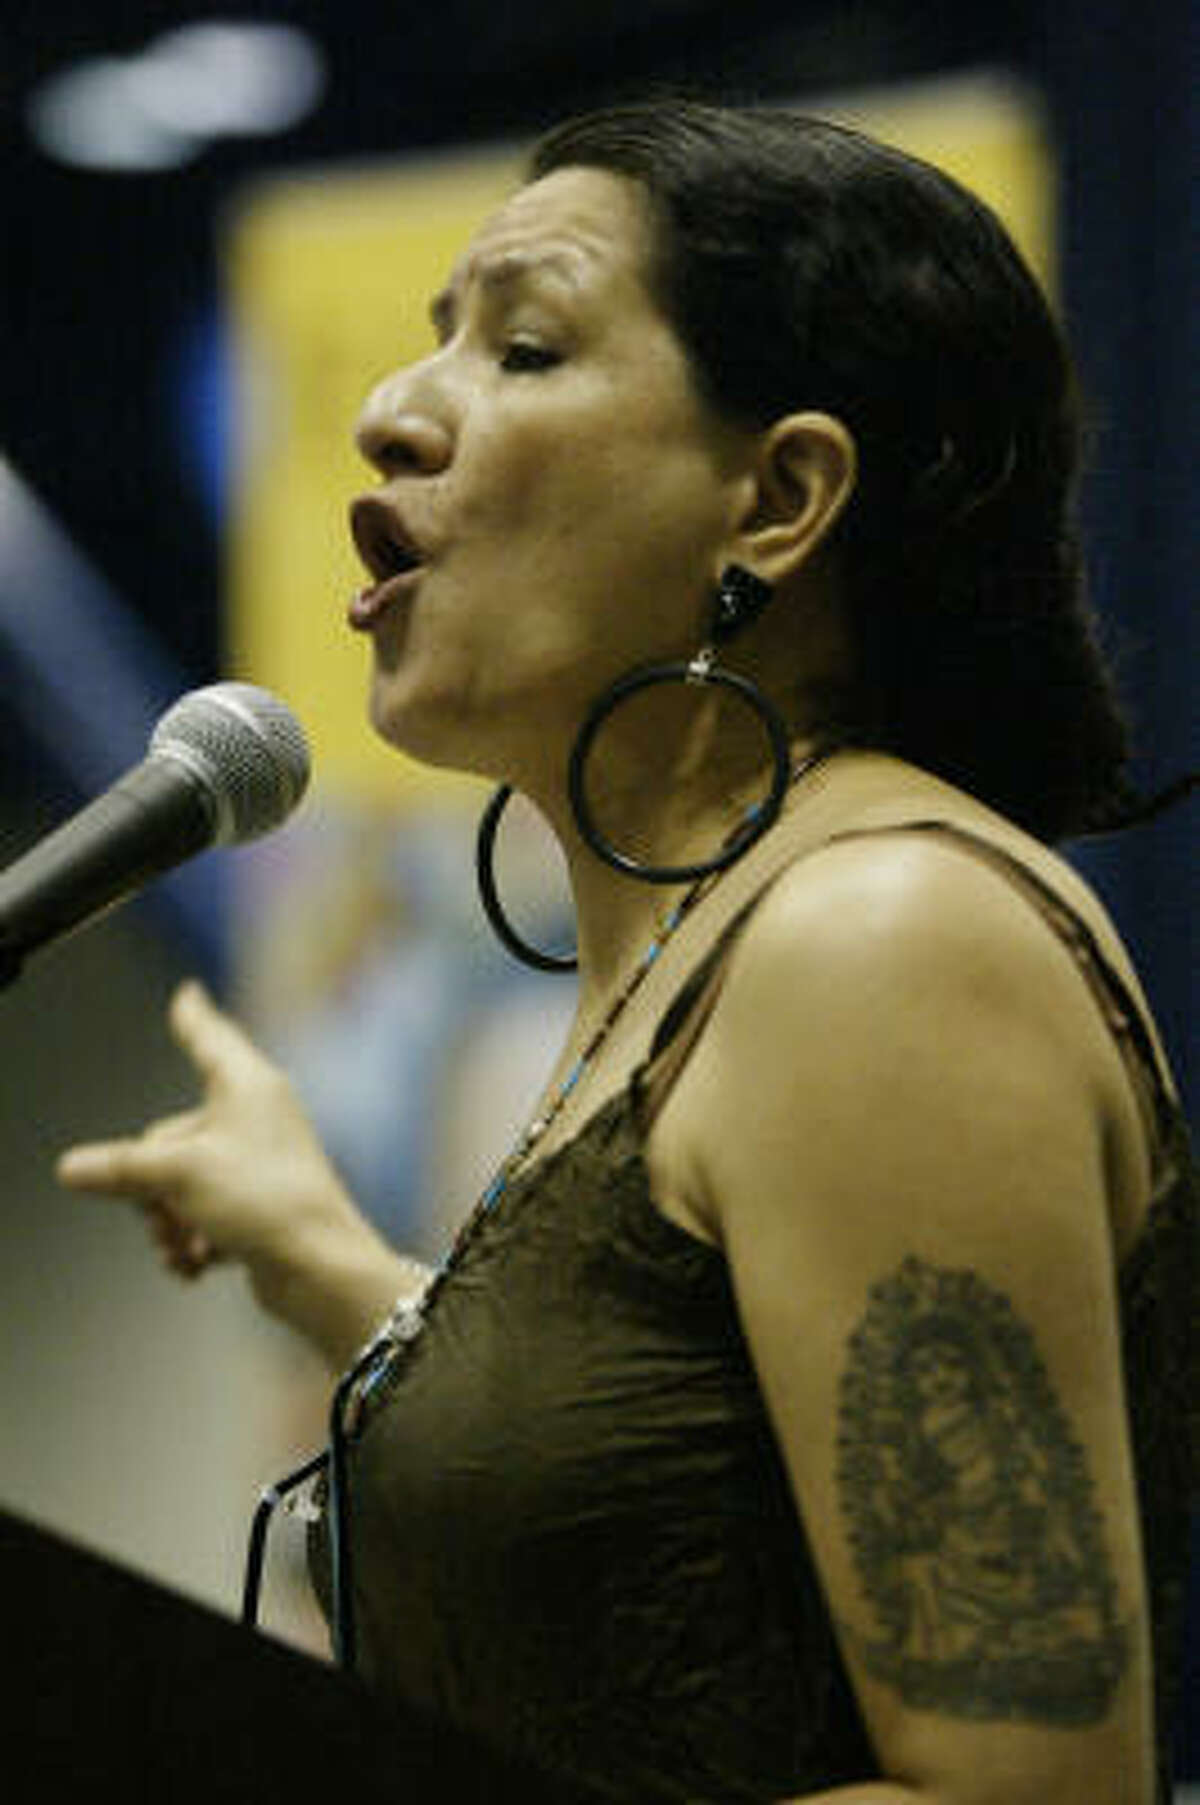 Sandra Cisneros read from her works at the Houston Latino Book and Family Festival held at the Geo. R. Brown Convention Center on 10-11-03. , There were also exhibitor booths and games for children.